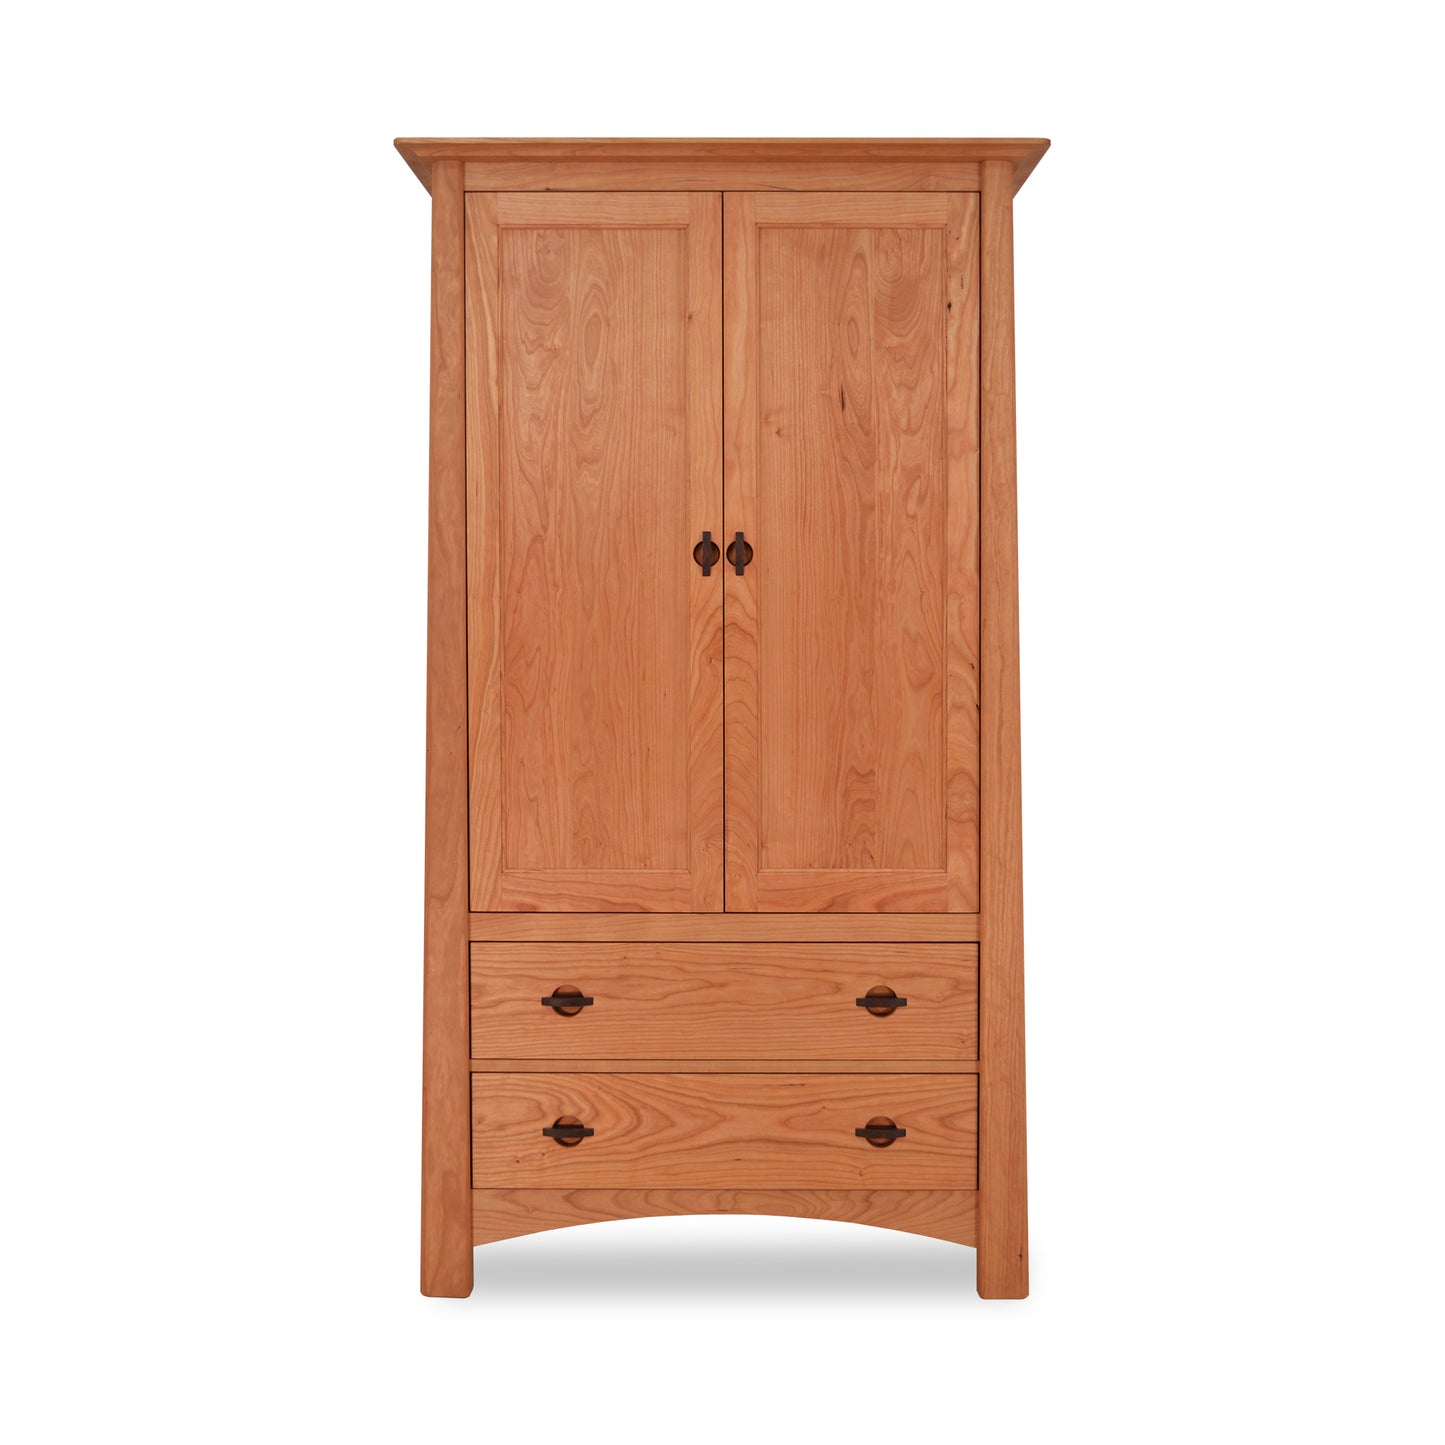 A Maple Corner Woodworks Cherry Moon armoire with two doors and three drawers, crafted from light brown wood, standing against a white background. The armoire features simple, classic handles on the doors and drawers.